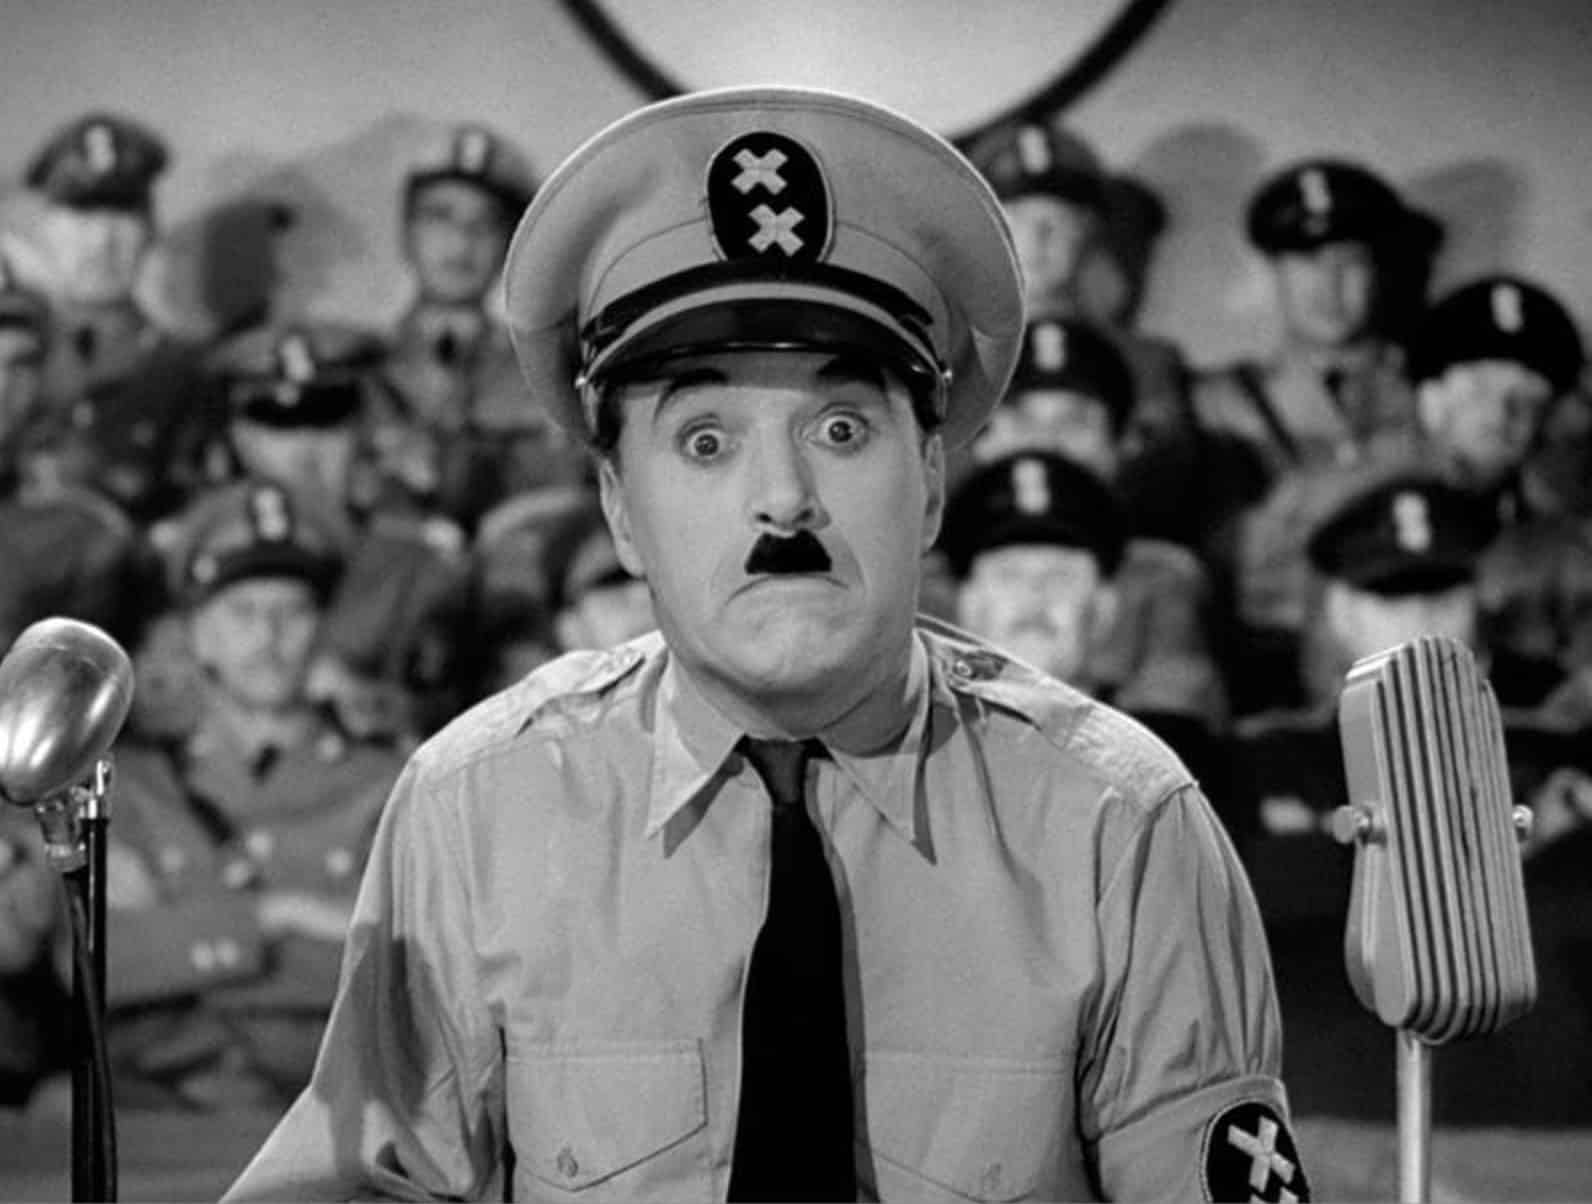 <p>Another one of the greatest speeches in movie history comes by way of Charlie Chaplin's "The Great Dictator." Made in response to the looming destruction of World War II, Chaplin plays a poor Jewish barber disguised as a bombastic dictator. When forced to speak to the people in a Nuremberg-style rally, Chaplin subverts his audience's expectations with his impassioned, heartfelt speech.</p> <p>In the speech, Chaplin's character lets down his guard and lets his humanity shine through. Instead of calling for division, he calls for peace, urging people to live by each other's happiness and not their misery. He decries the widespread use of machines and how they transform human feeling into cold, often bitter, calculation. It's one of the greatest speeches in movie history because it uses explosive rhetoric from a dictatorial pulpit to fight against extremism. It asks the audience to see their fellow people as just that, people, instead of letting division sow disaster and impede progress.</p>